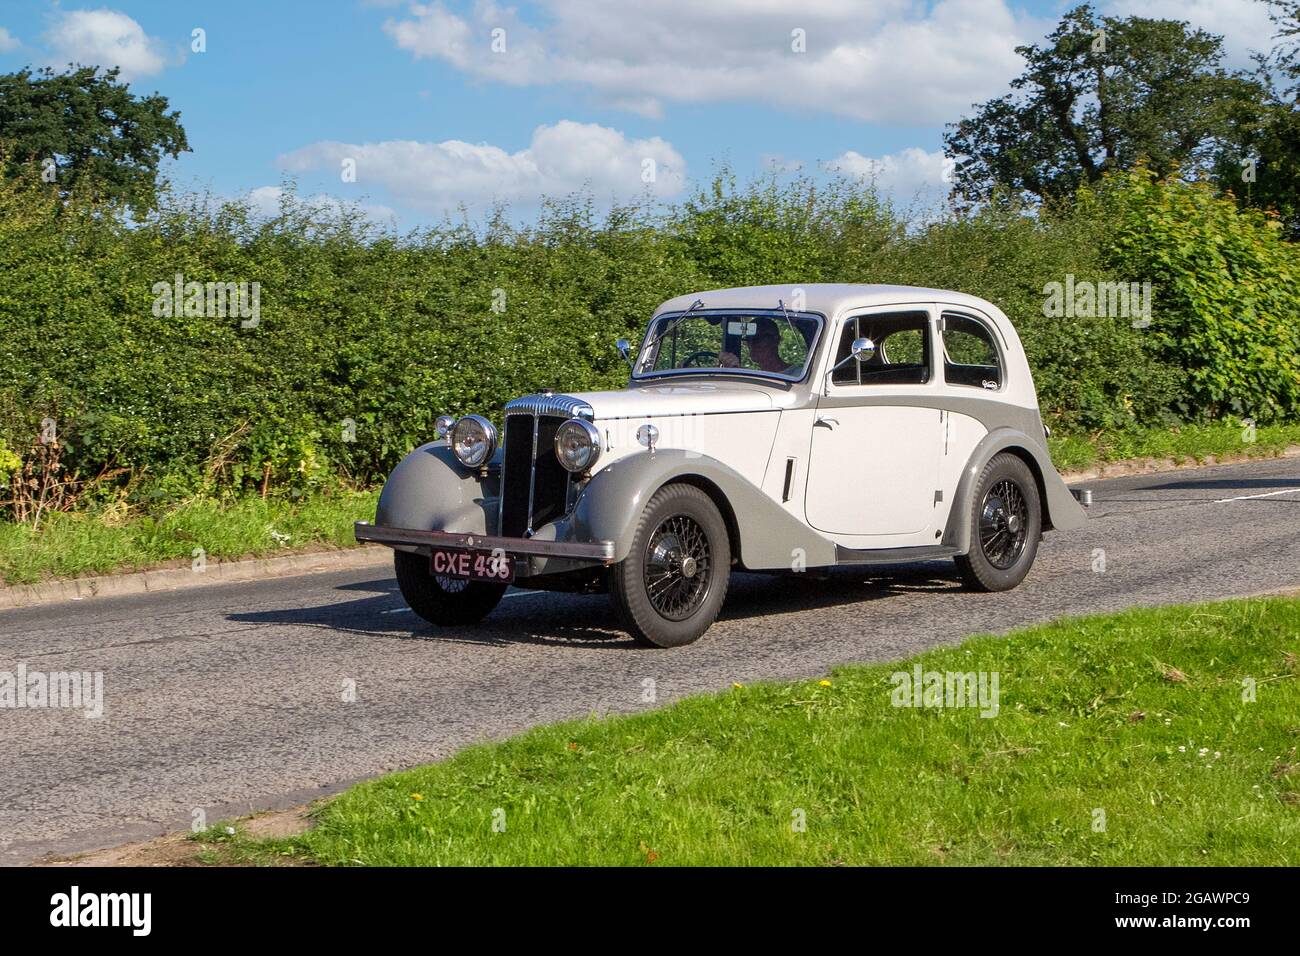 1936, 30s, 1930s pre-war Daimler straight-6, 2003 cc 2dr saloon classic svintage car arriving at the Capesthorne Hall classic car show, UK Stock Photo